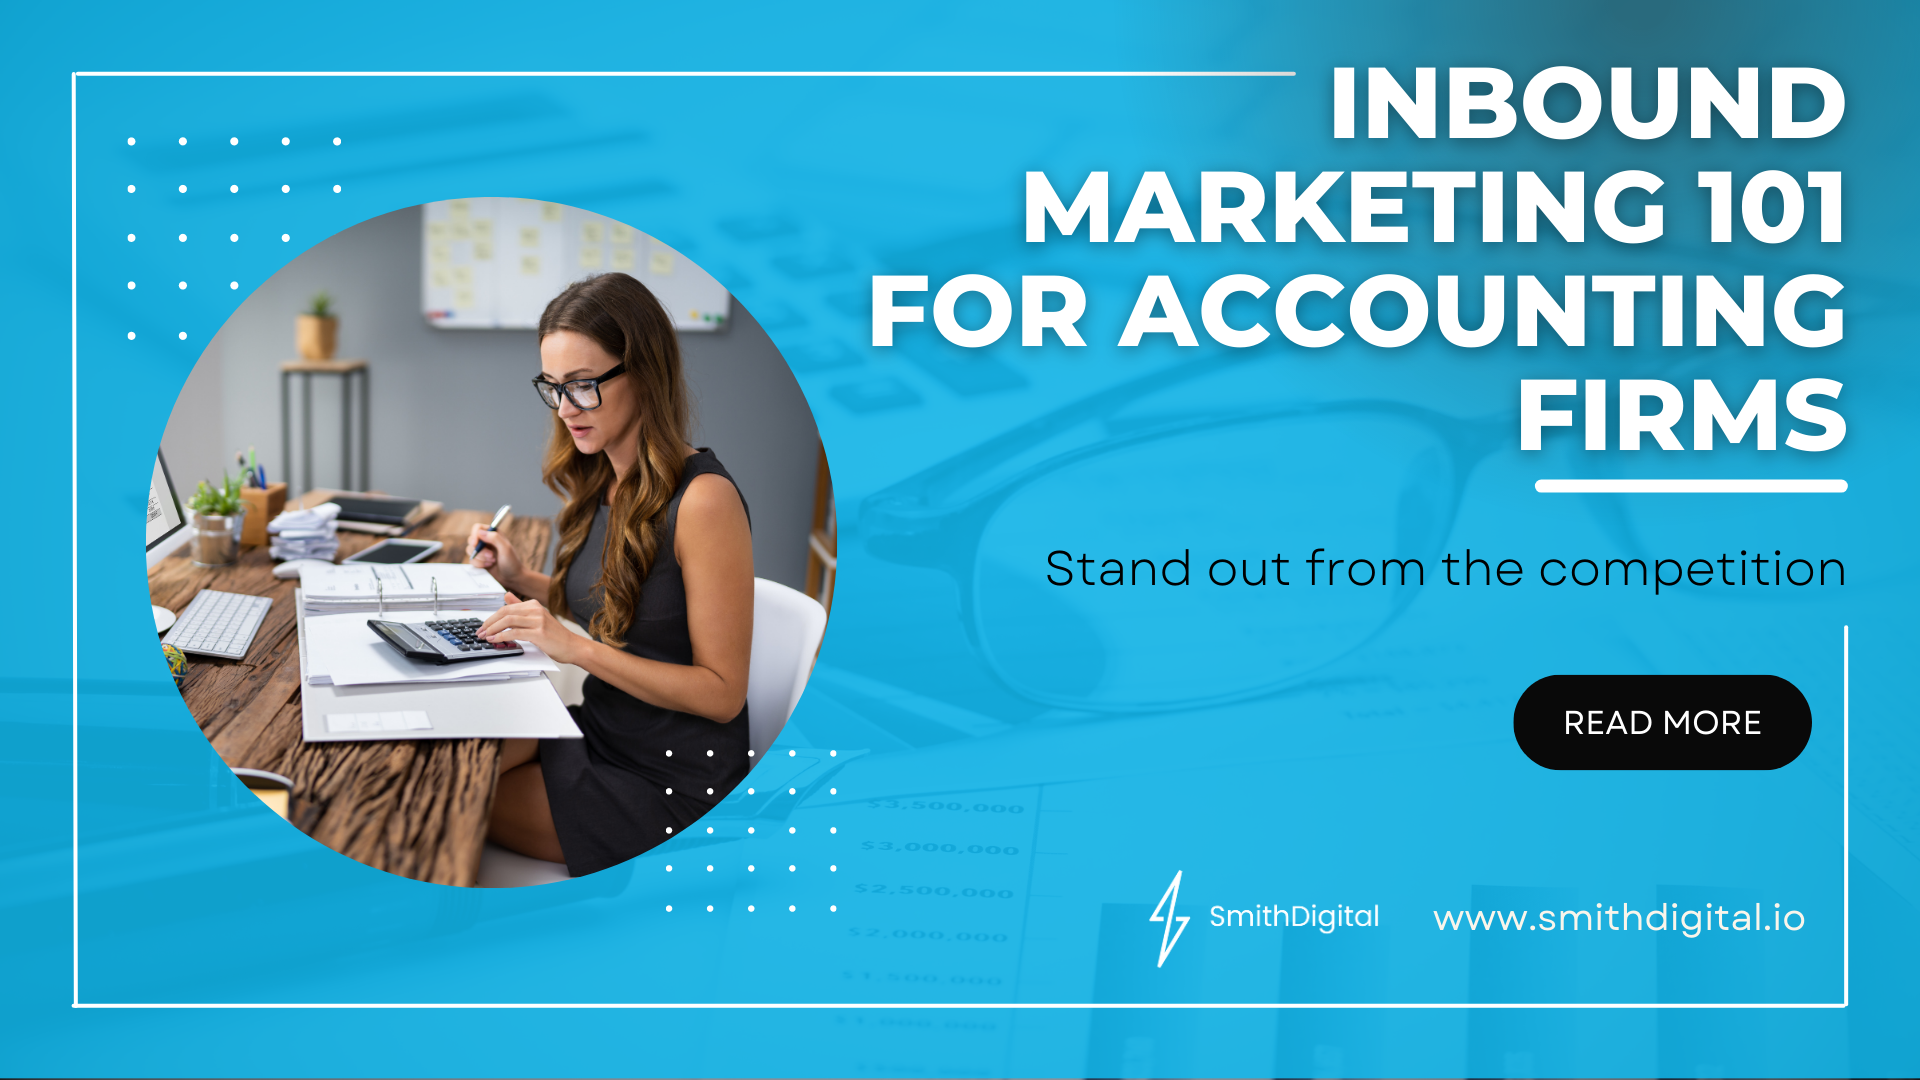 Inbound Marketing 101 for Accounting Firms